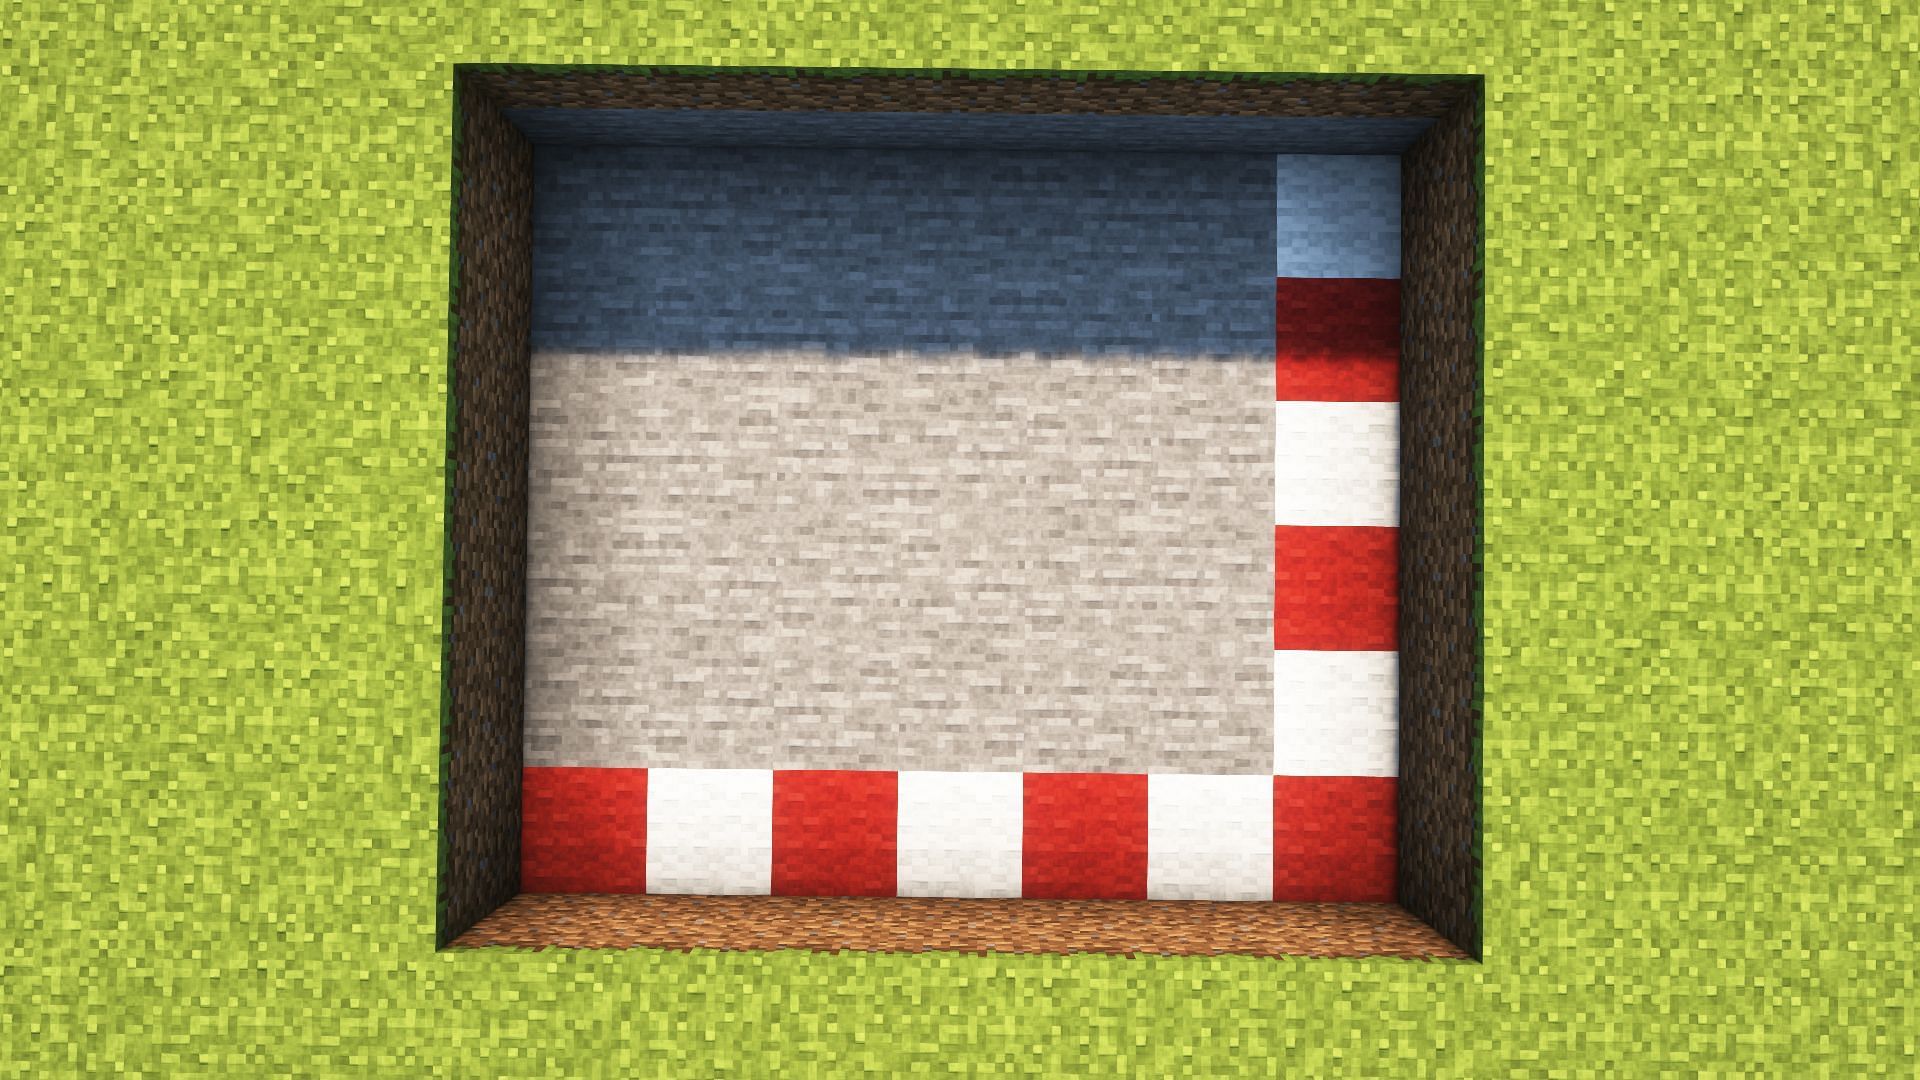 Wool blocks are placed to better understand the dimensions (Image via Mojang)